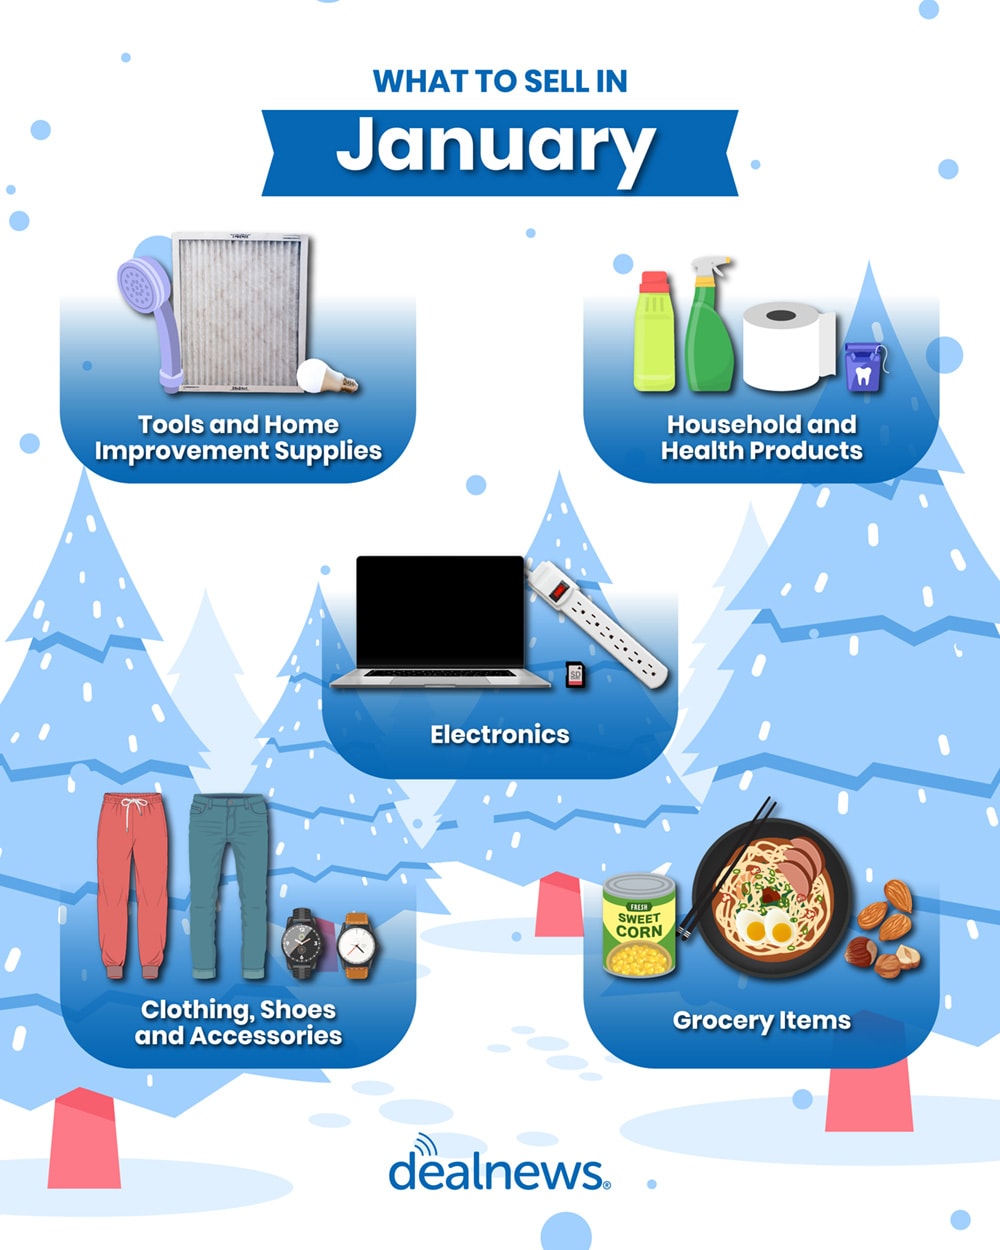 Five of the best things to sell in January are shown in infographic.